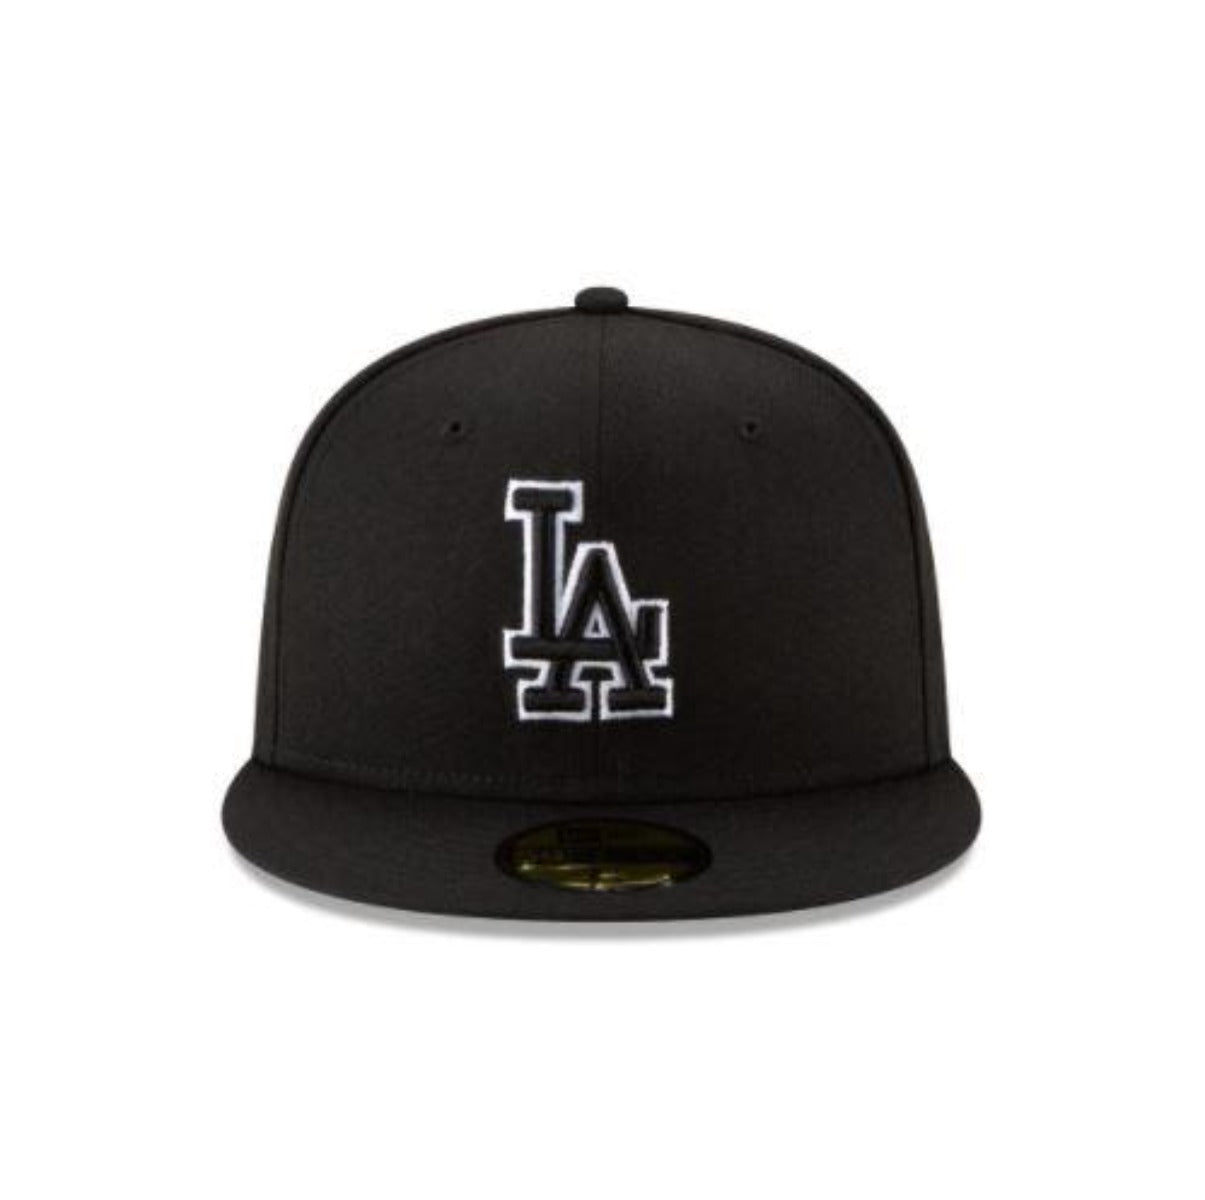 Los Angeles Dodgers NEW ERA BASIC COLLECTION BLACK OUTLINE FITTED 59FIFTY-BLACK AND WHITE